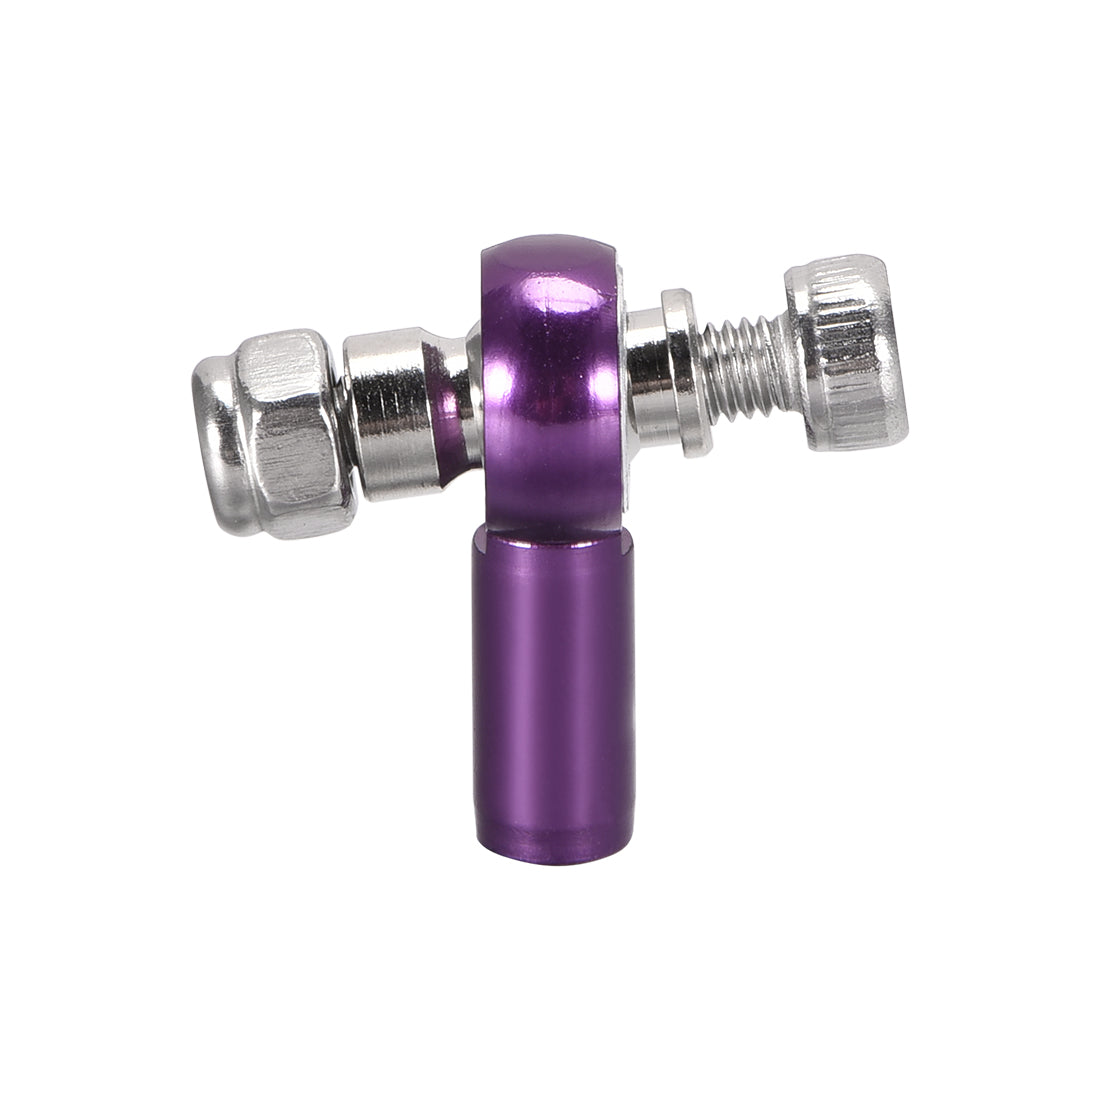 uxcell Uxcell 4 PCS M3/3mm 18mm Linkage Rod End Tie Rod End Ball Head Joint Adapter Purple for RC  Crawler Boat